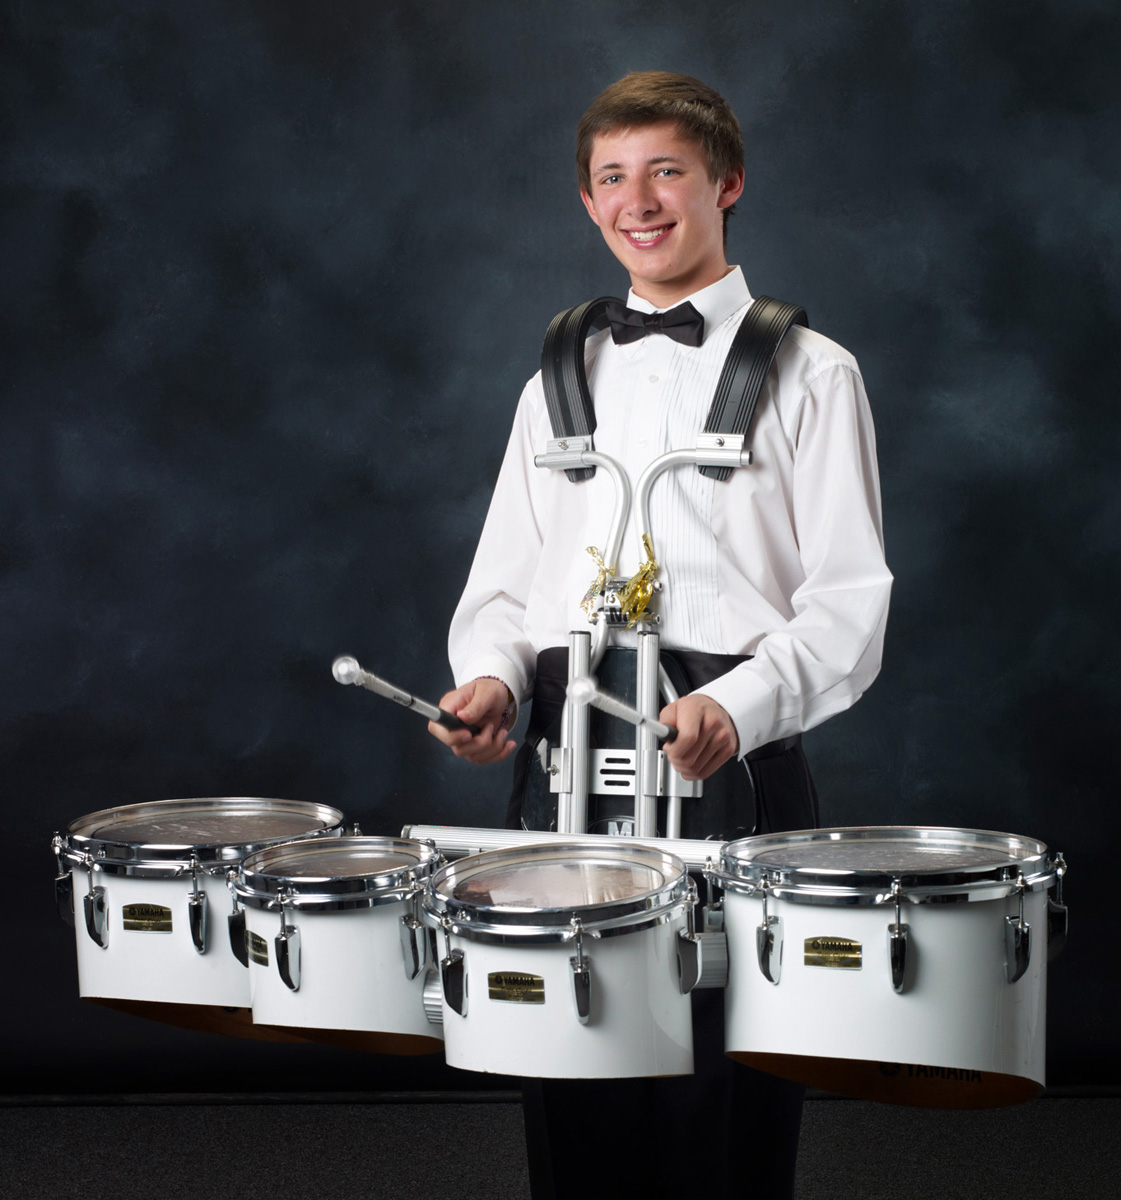 Senior Photo with Drums